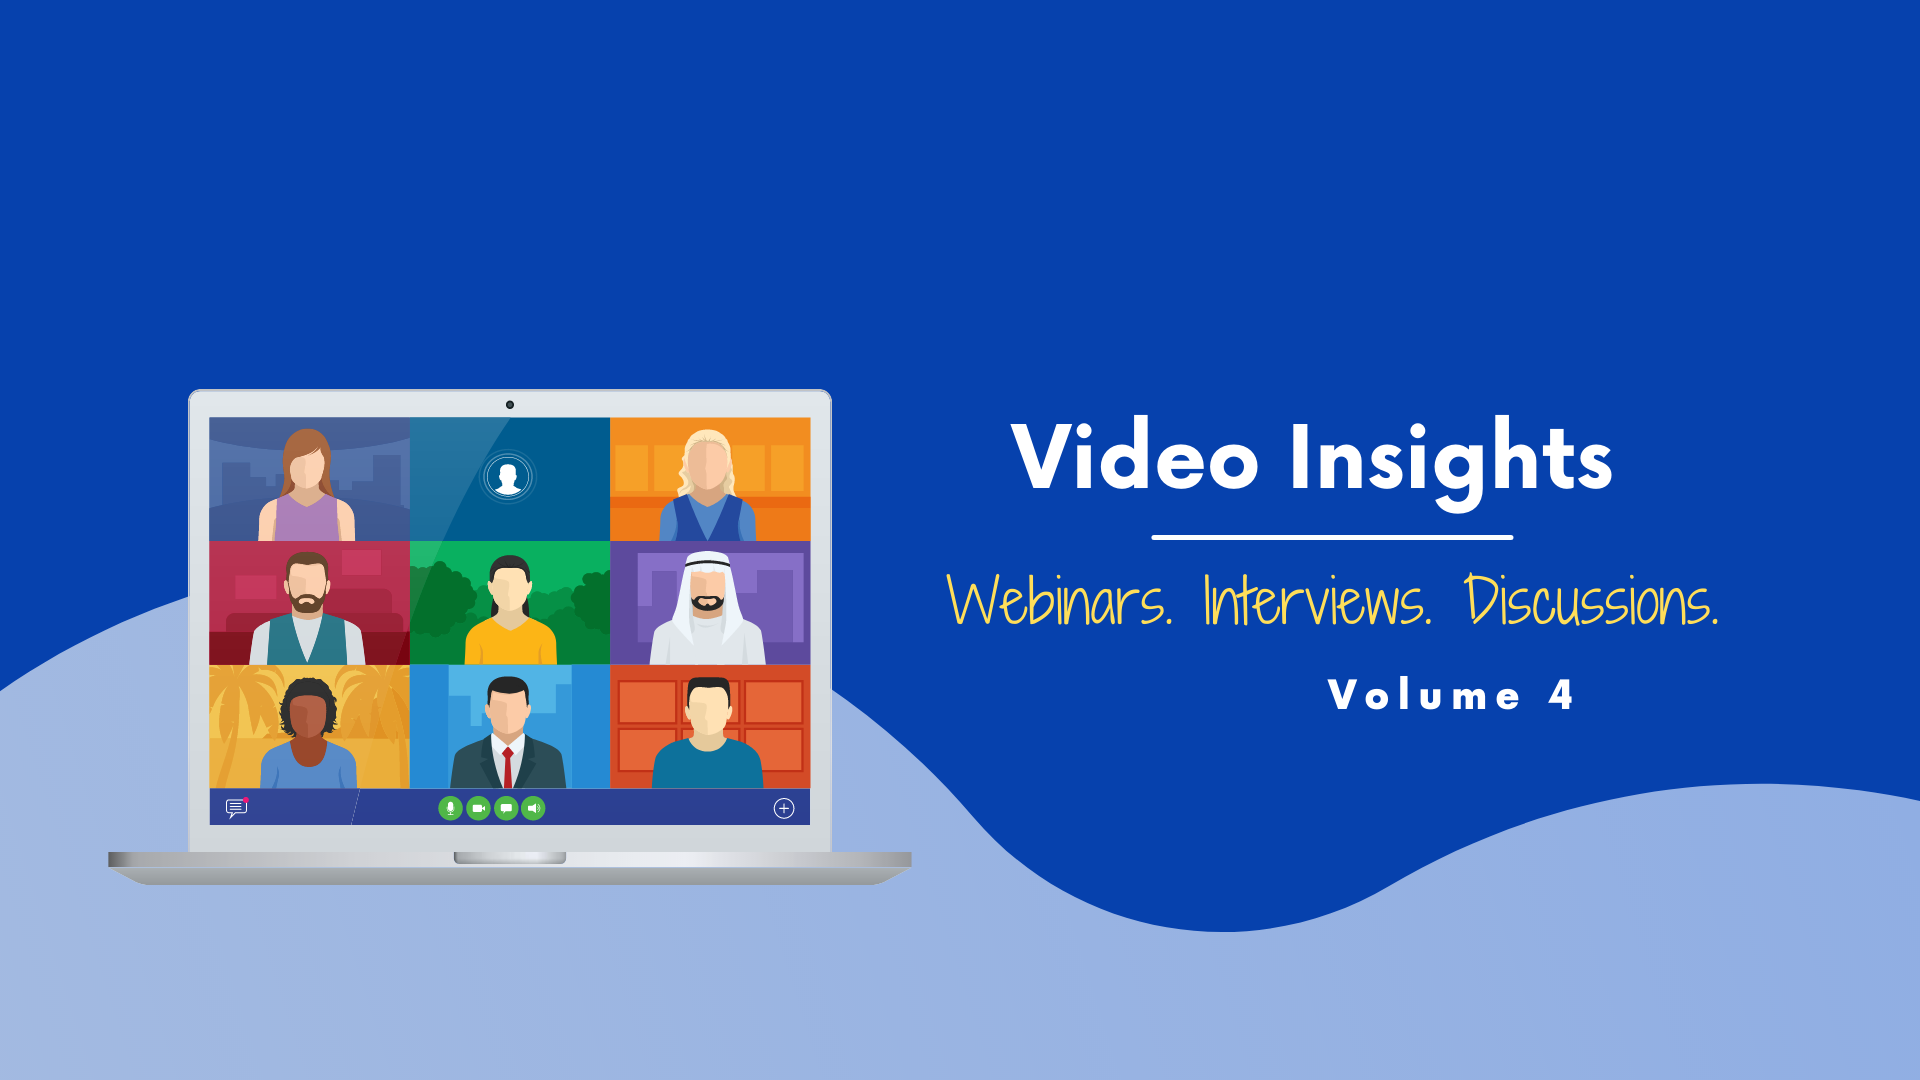 Video Insights: Webinars & Discussions (Volume 4)